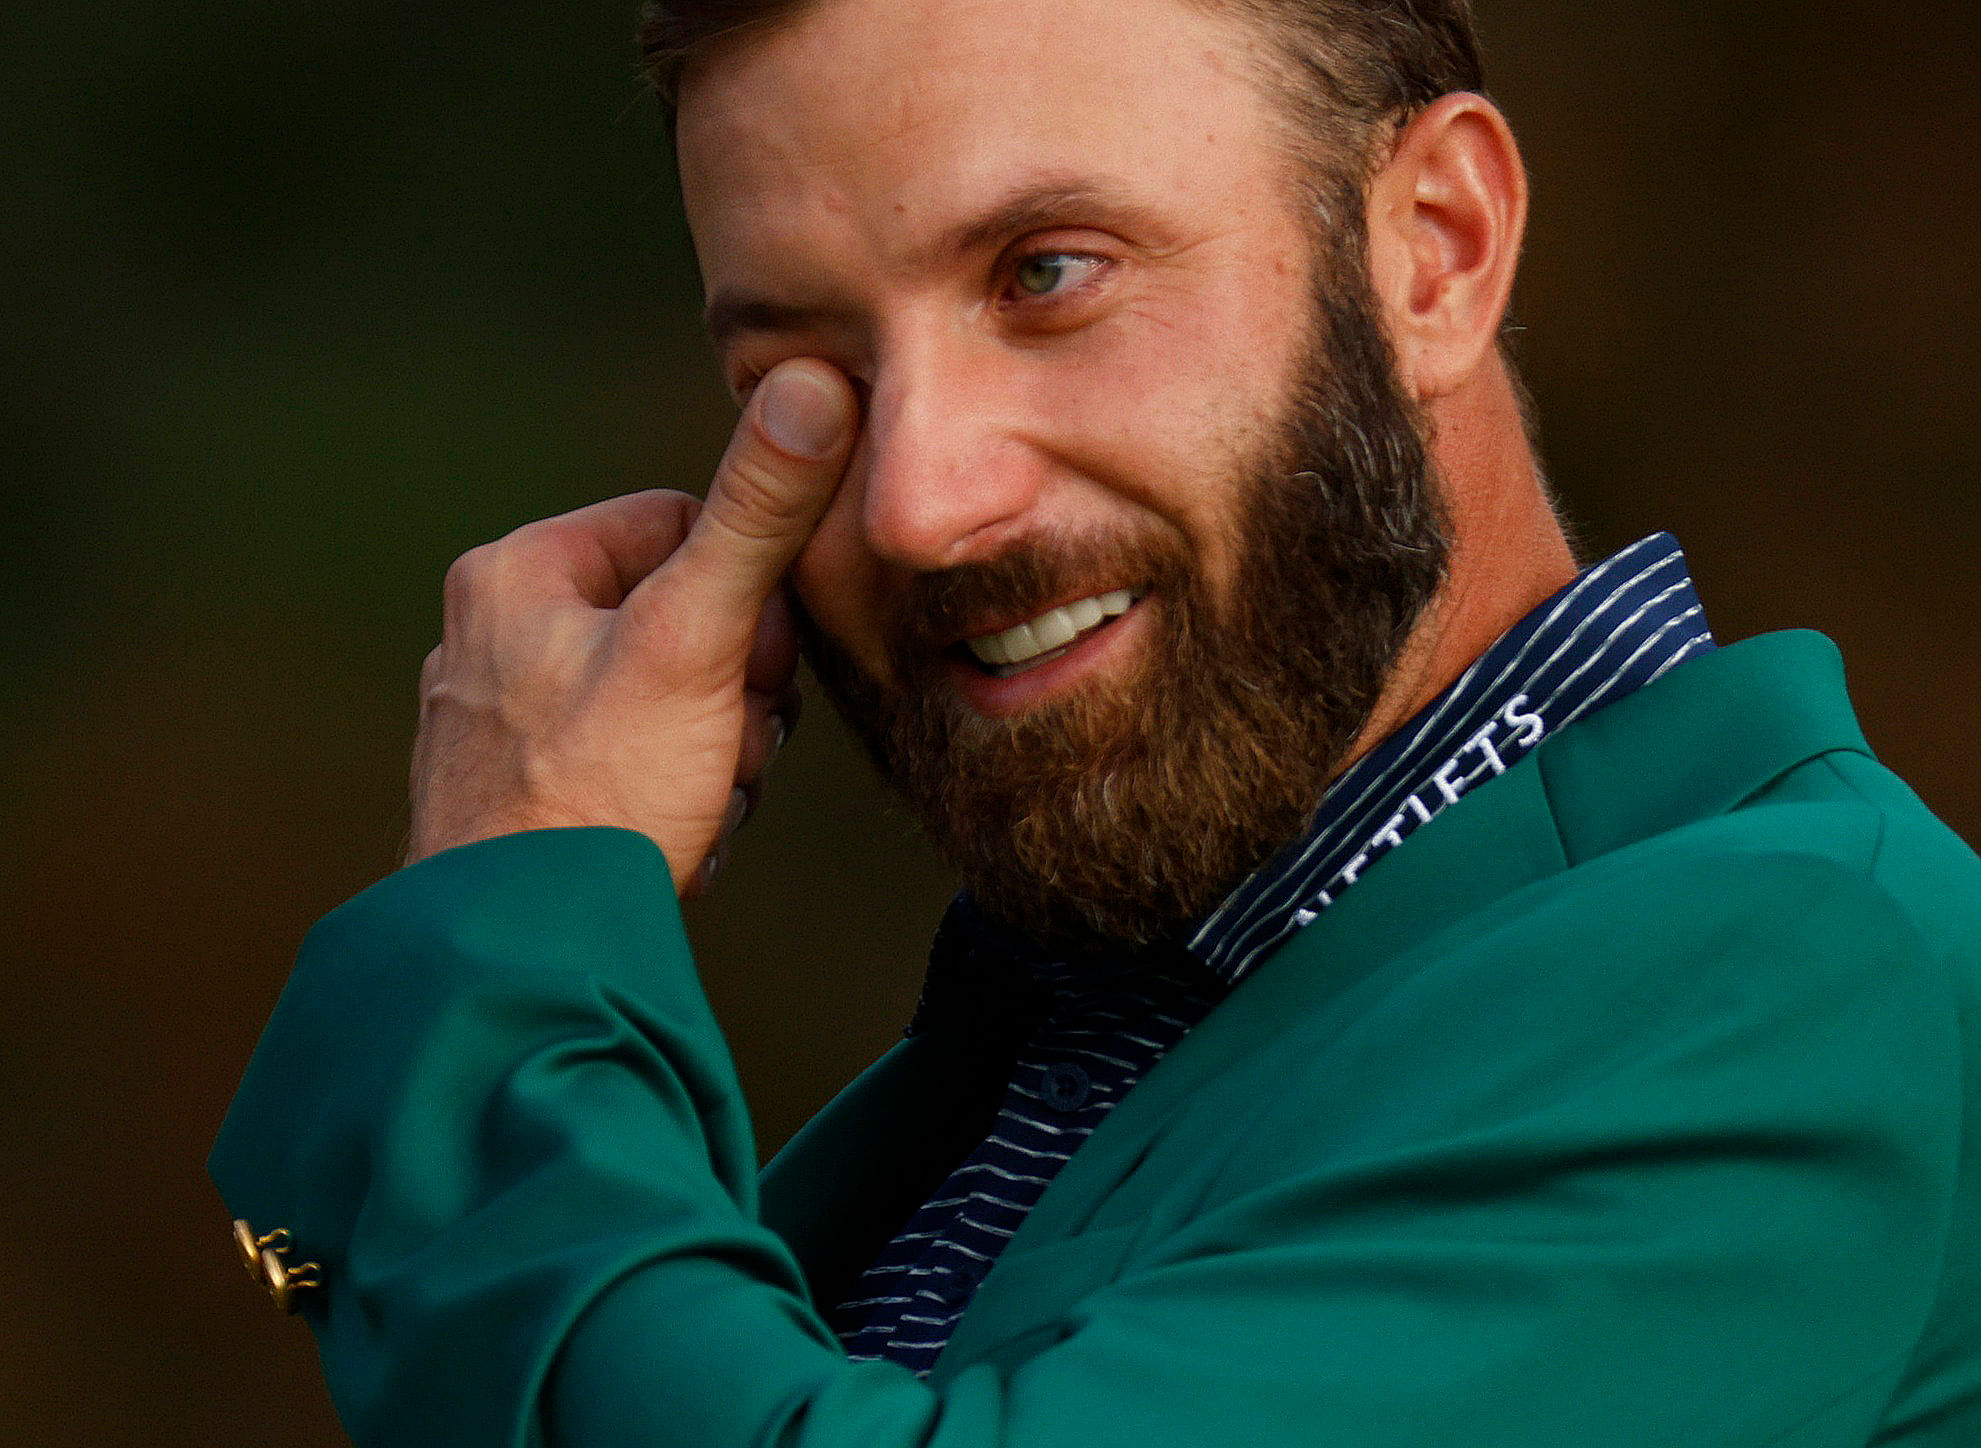 Dustin Johnson of the US celebrates with his green jacket after winning The Masters. Credit: REUTERS